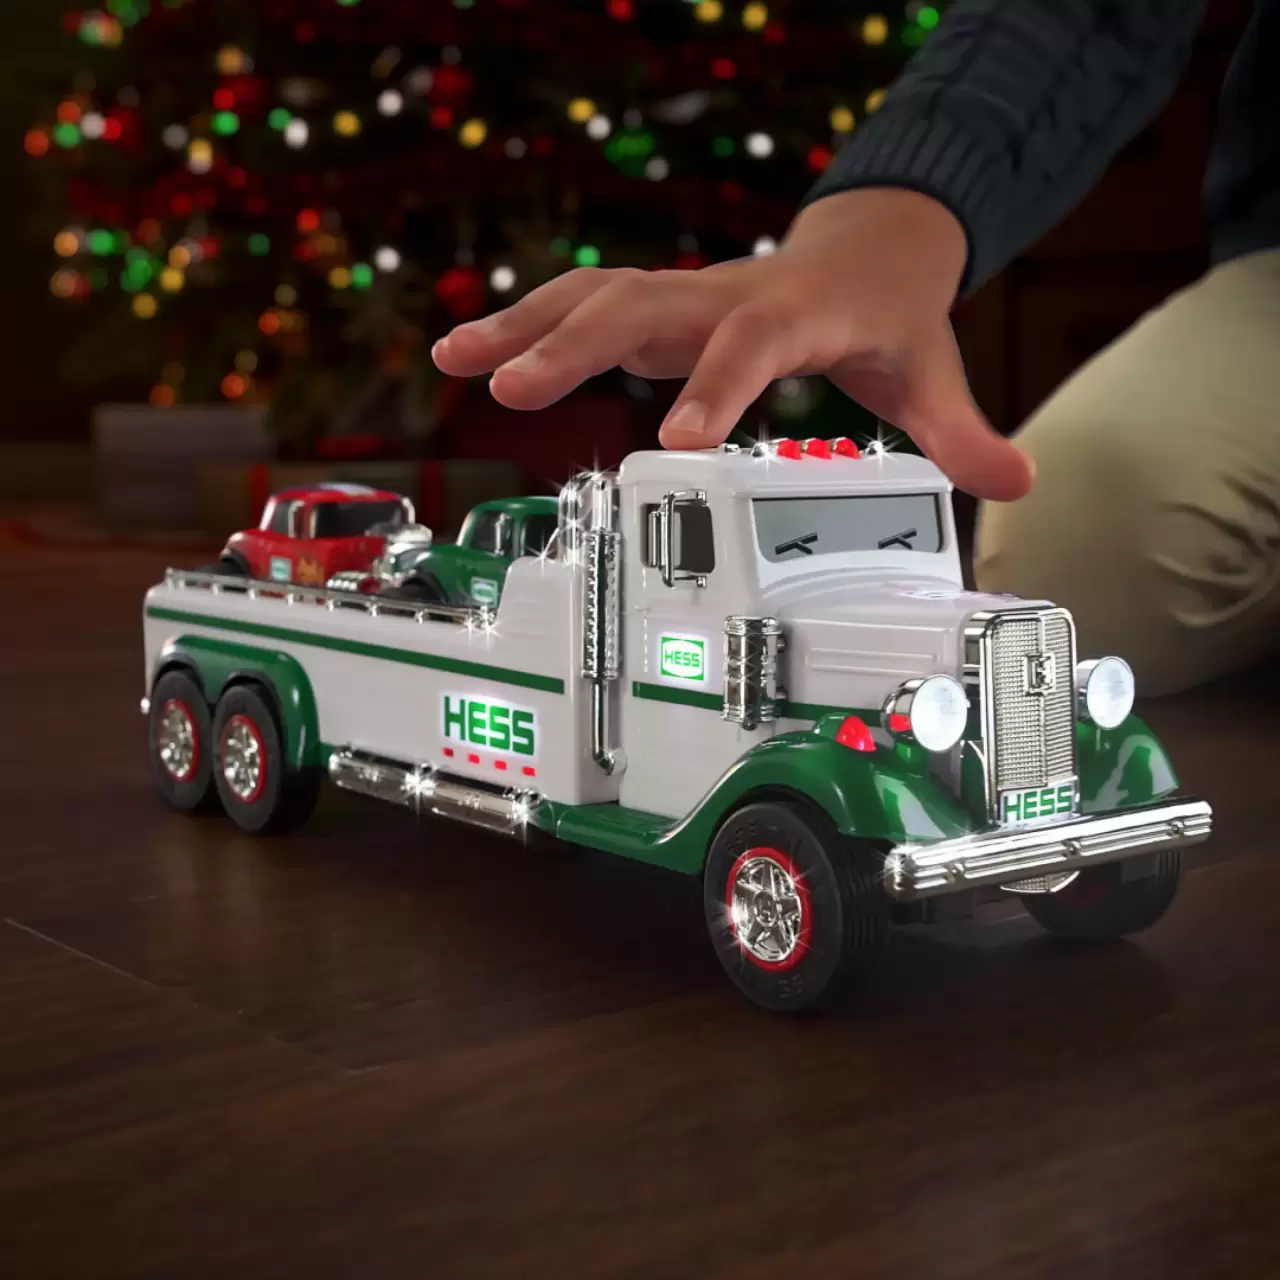 3-in-1 Hess Flatbed Truck with Hot Rods On Sale Now img#1